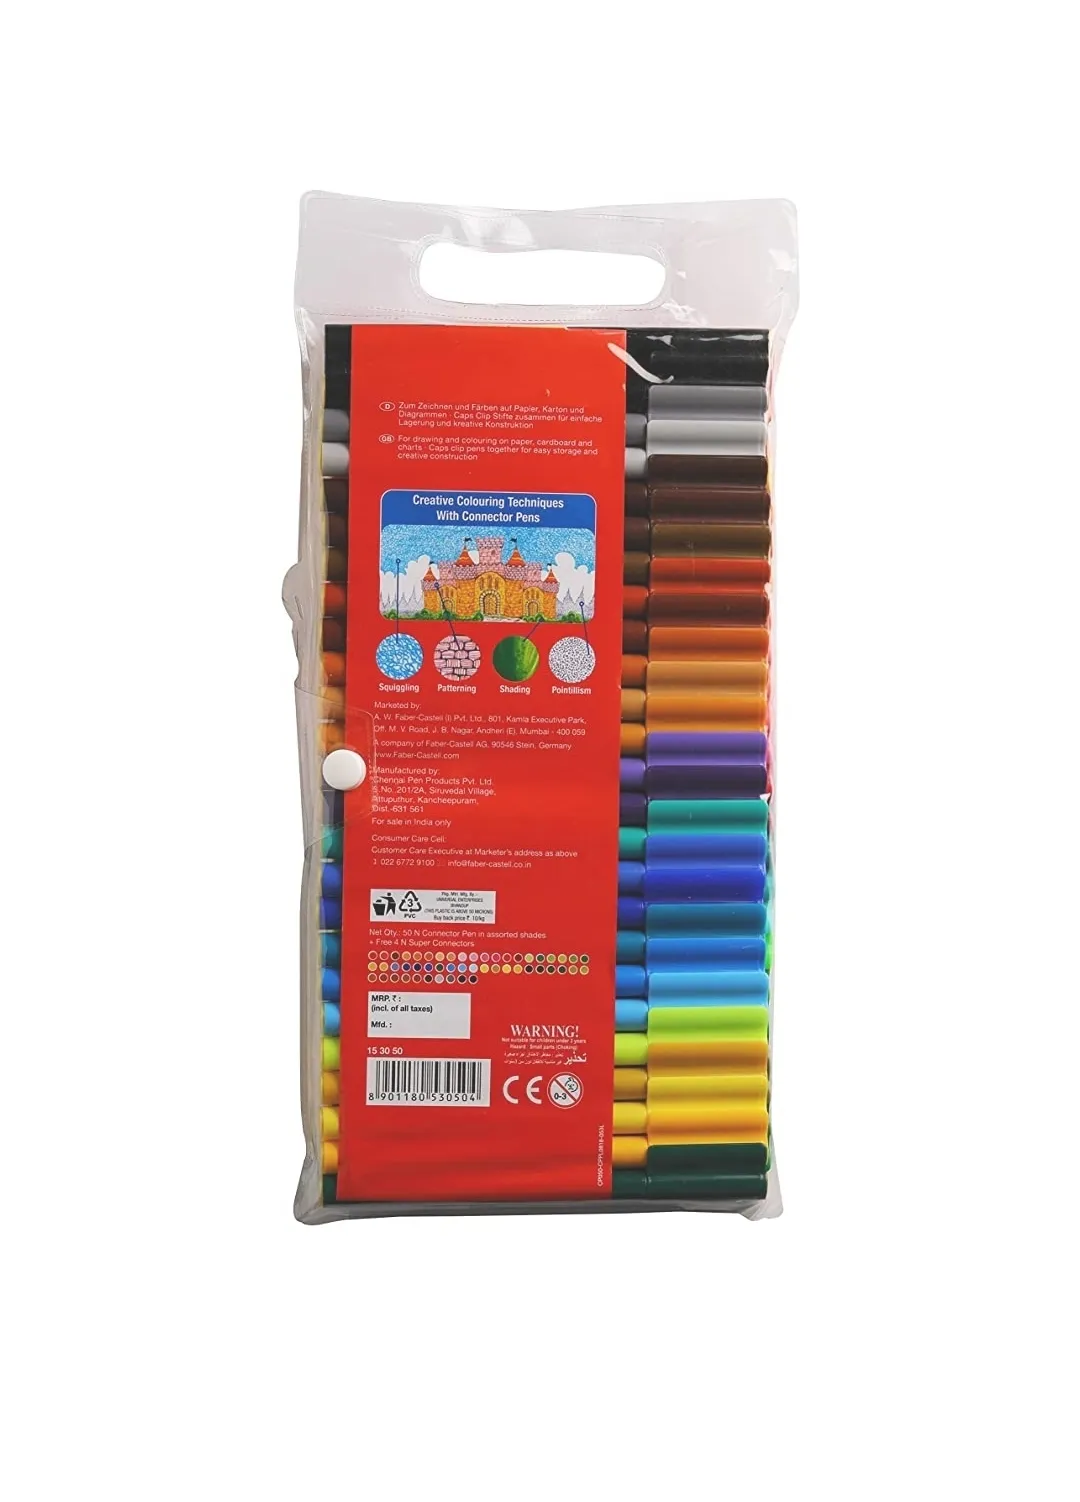 Faber Castell Connector Pens Assorted Set of 50